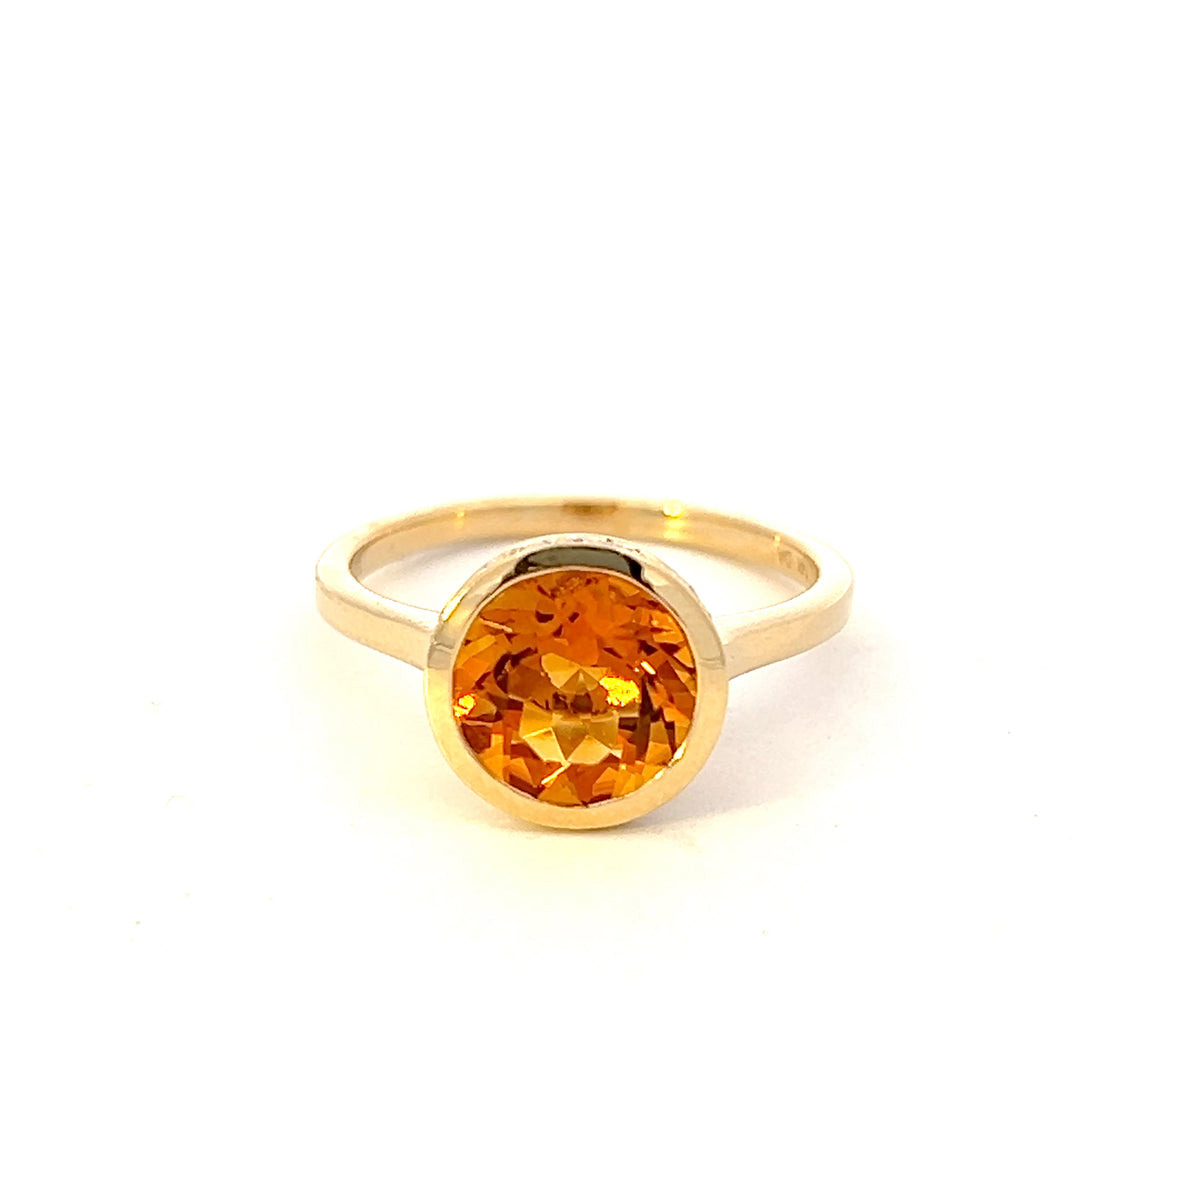 14K Yellow Gold 2.35cttw Citrine and 0.09cttw Diamond Ring - Size 7